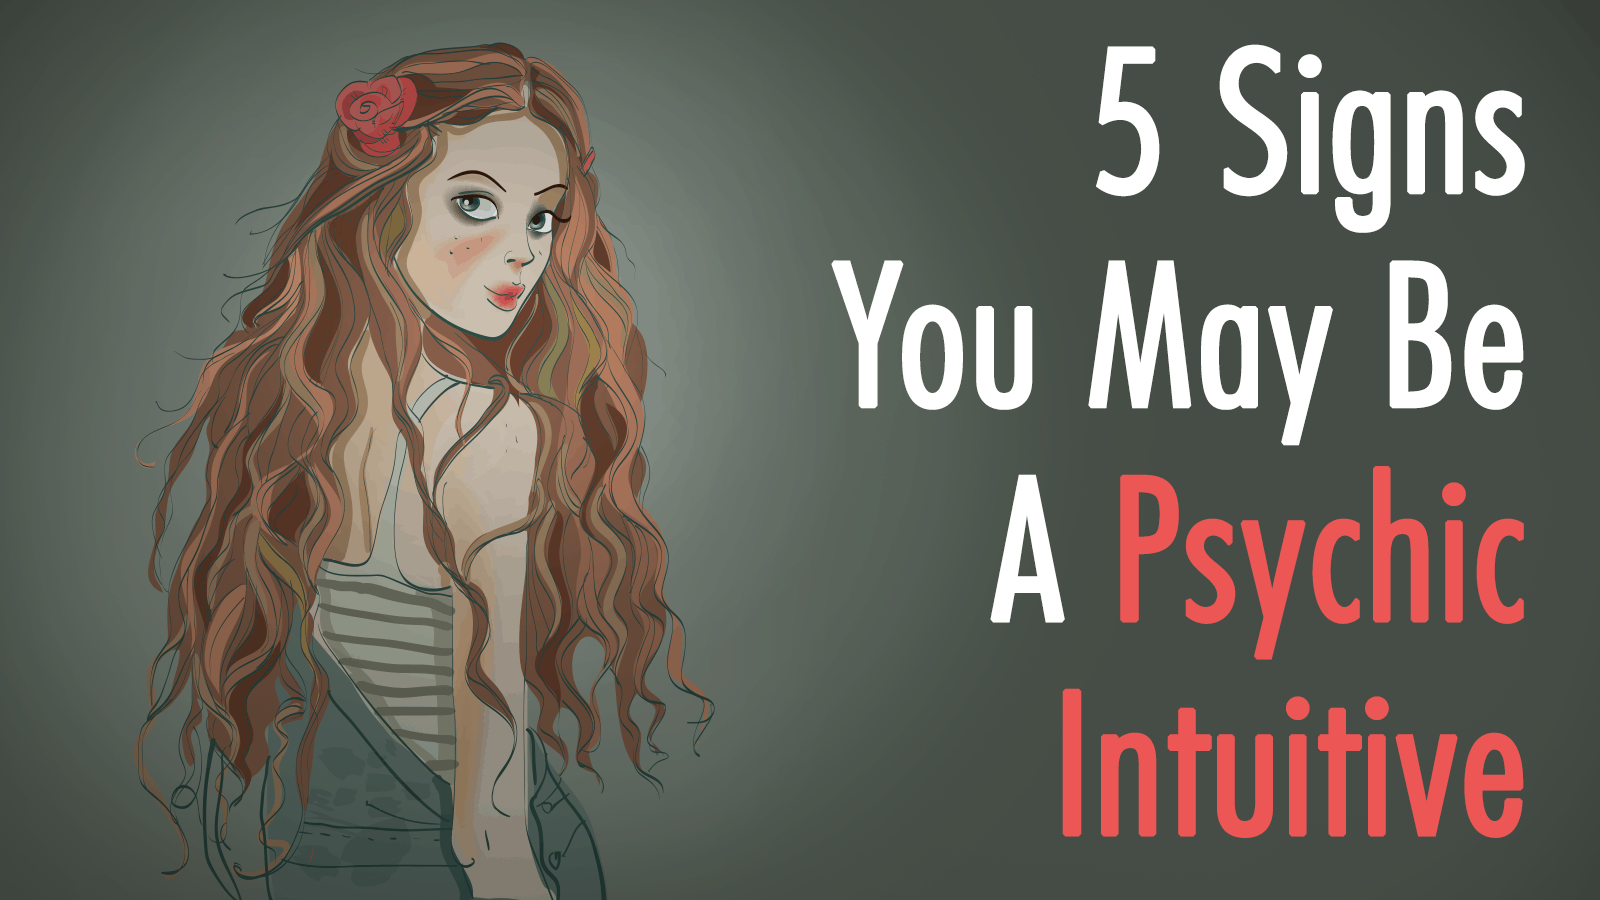 5 Signs You May Be A Psychic Intuitive